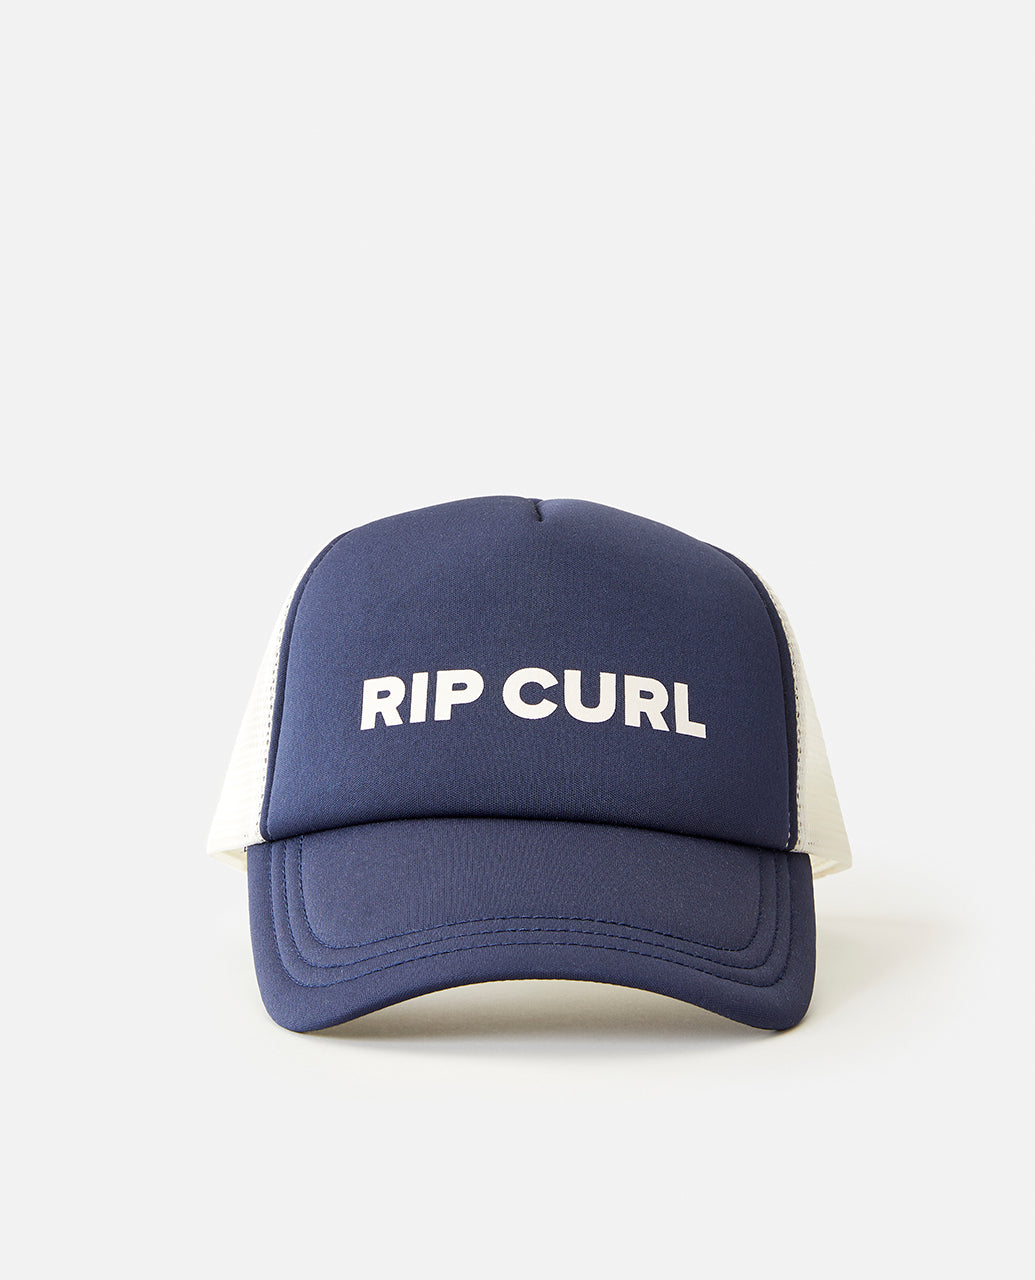 Rip Curl  South Africa (@ripcurlsa) • Instagram photos and videos